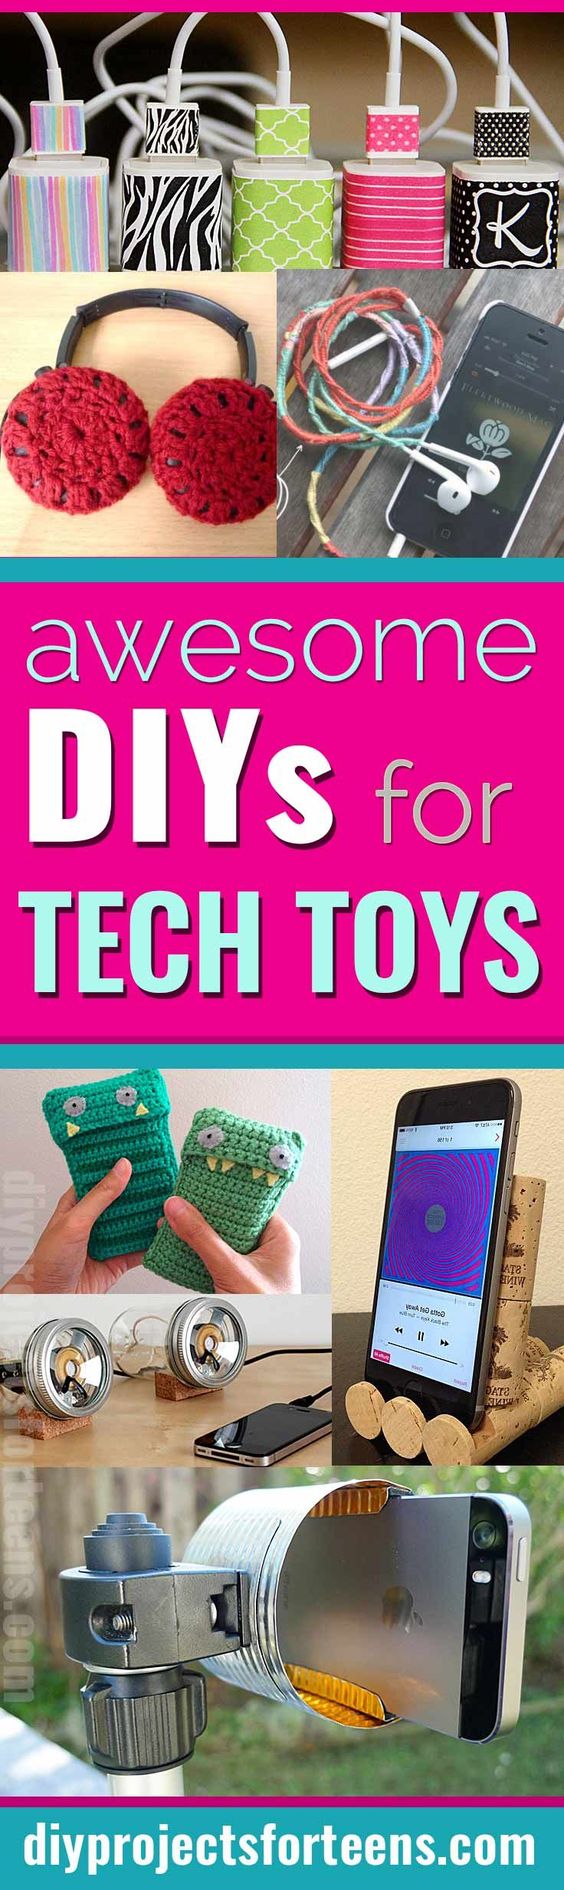 Awesome DIYs for your Tech Toys